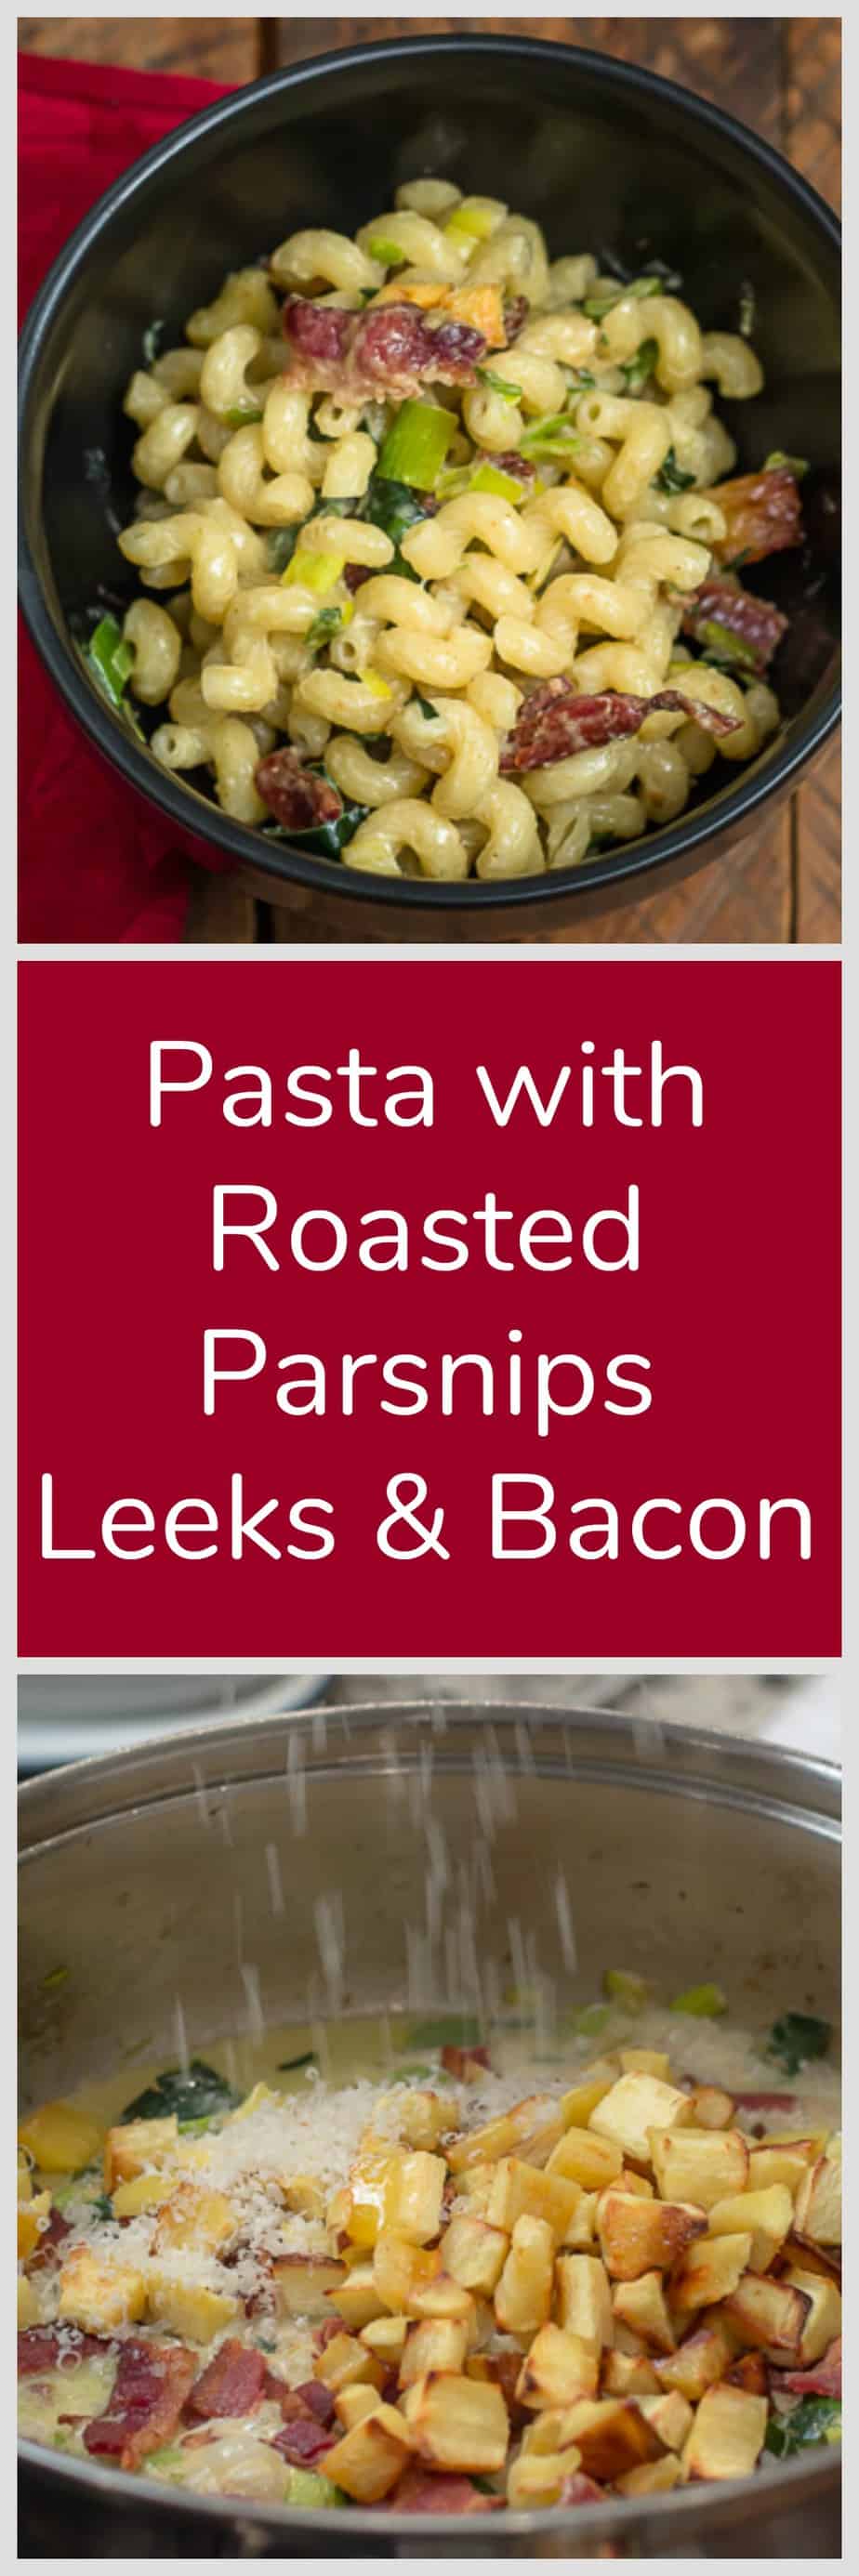 Pasta with Roasted Parsnips, Leeks and Bacon #cozy #creamy #comfortfood #pasta